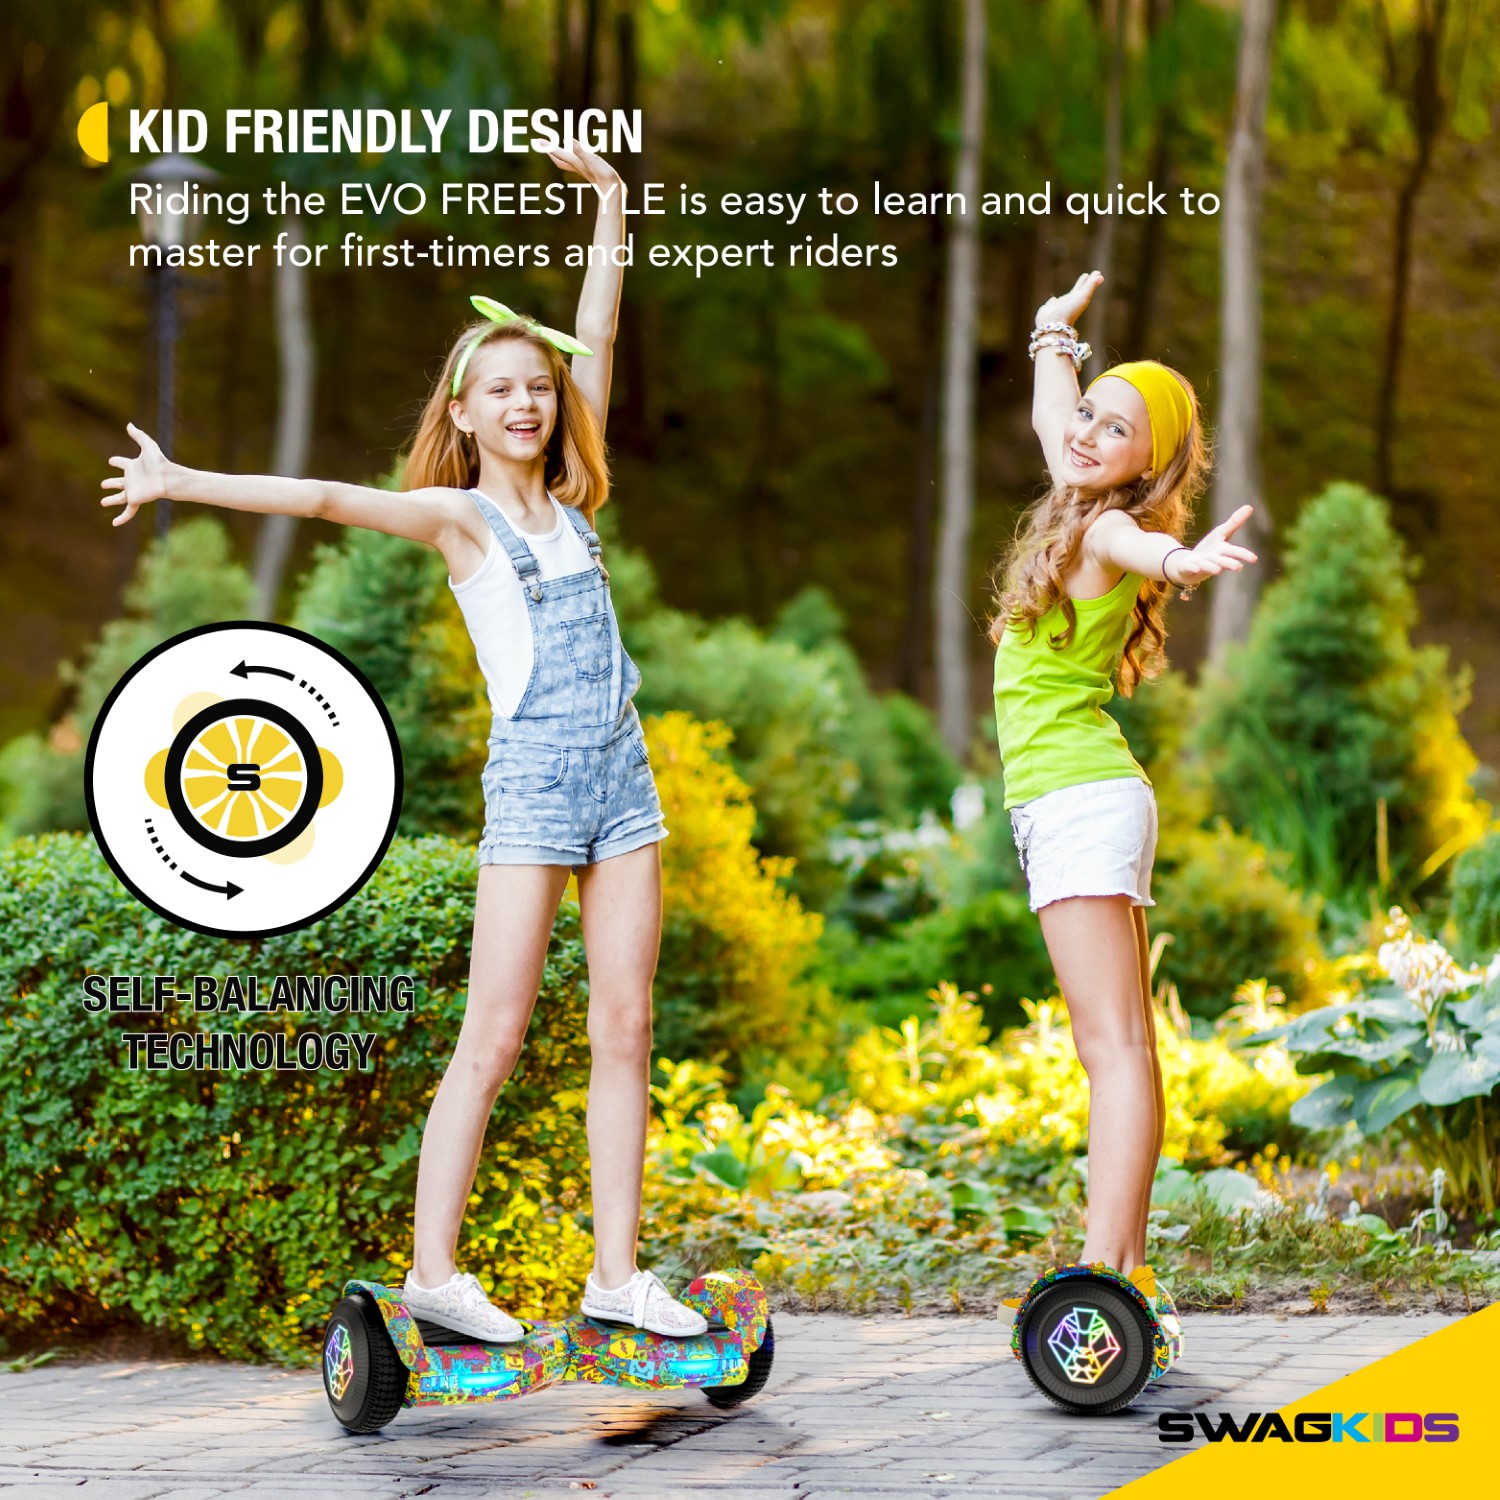 Swagtron Multicolor SwagBOARD EVO Freestyle Hoverboard Bluetooth Speaker Light-Up Wheels, 7 MPH Max Speed - image 4 of 9